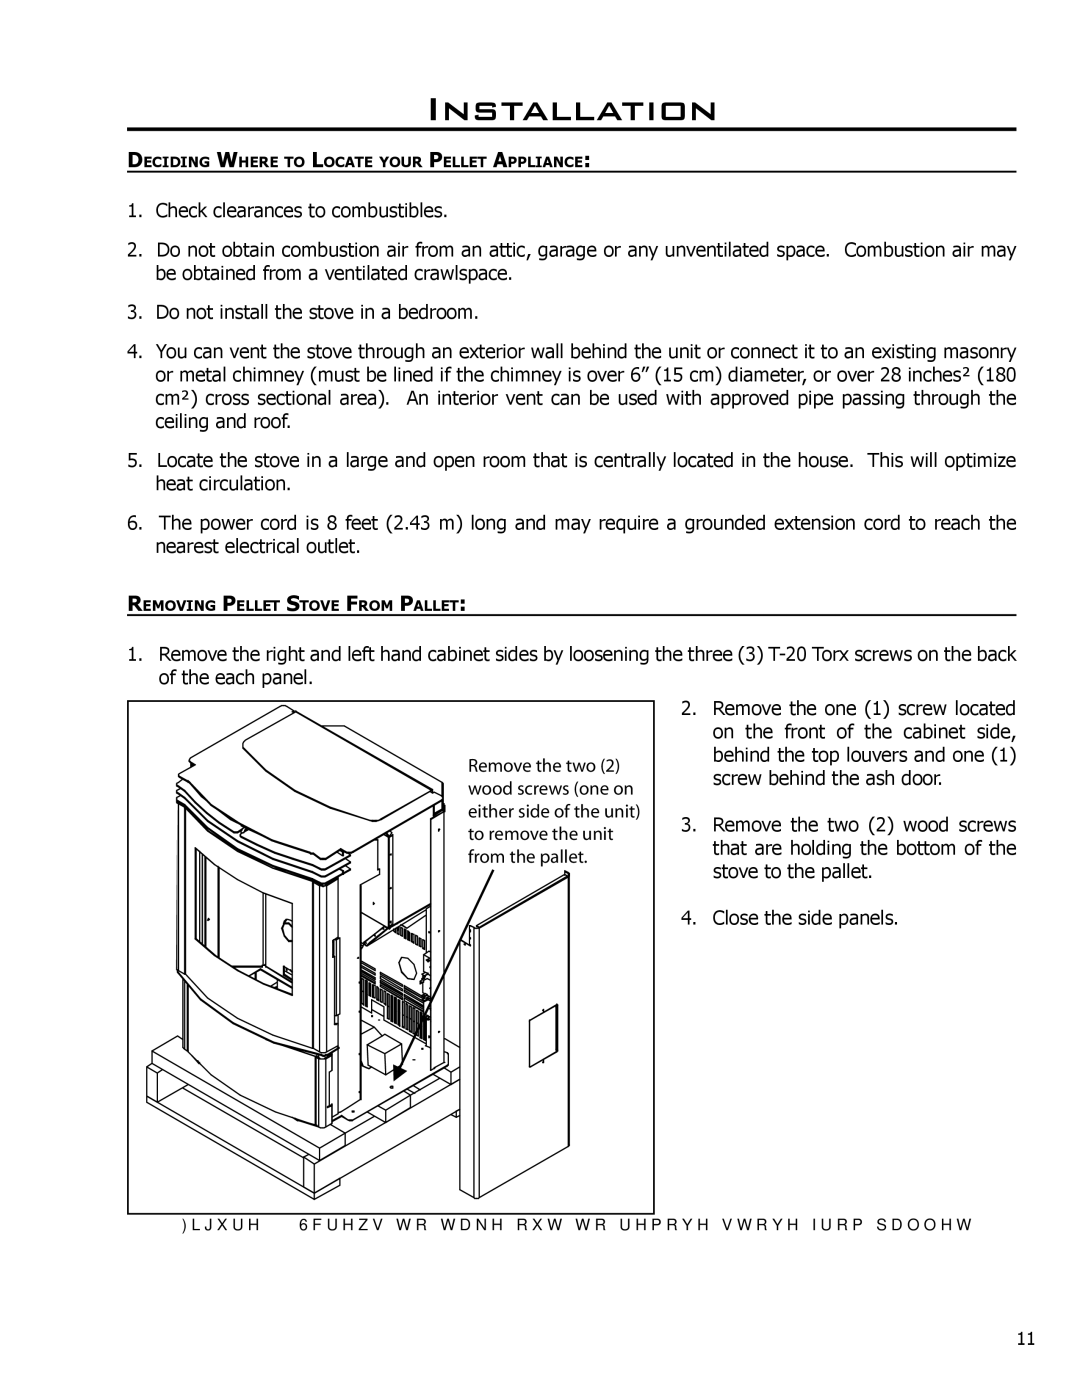 Enviro C-10608 owner manual Installation, Screws to take out to remove stove from pallet 